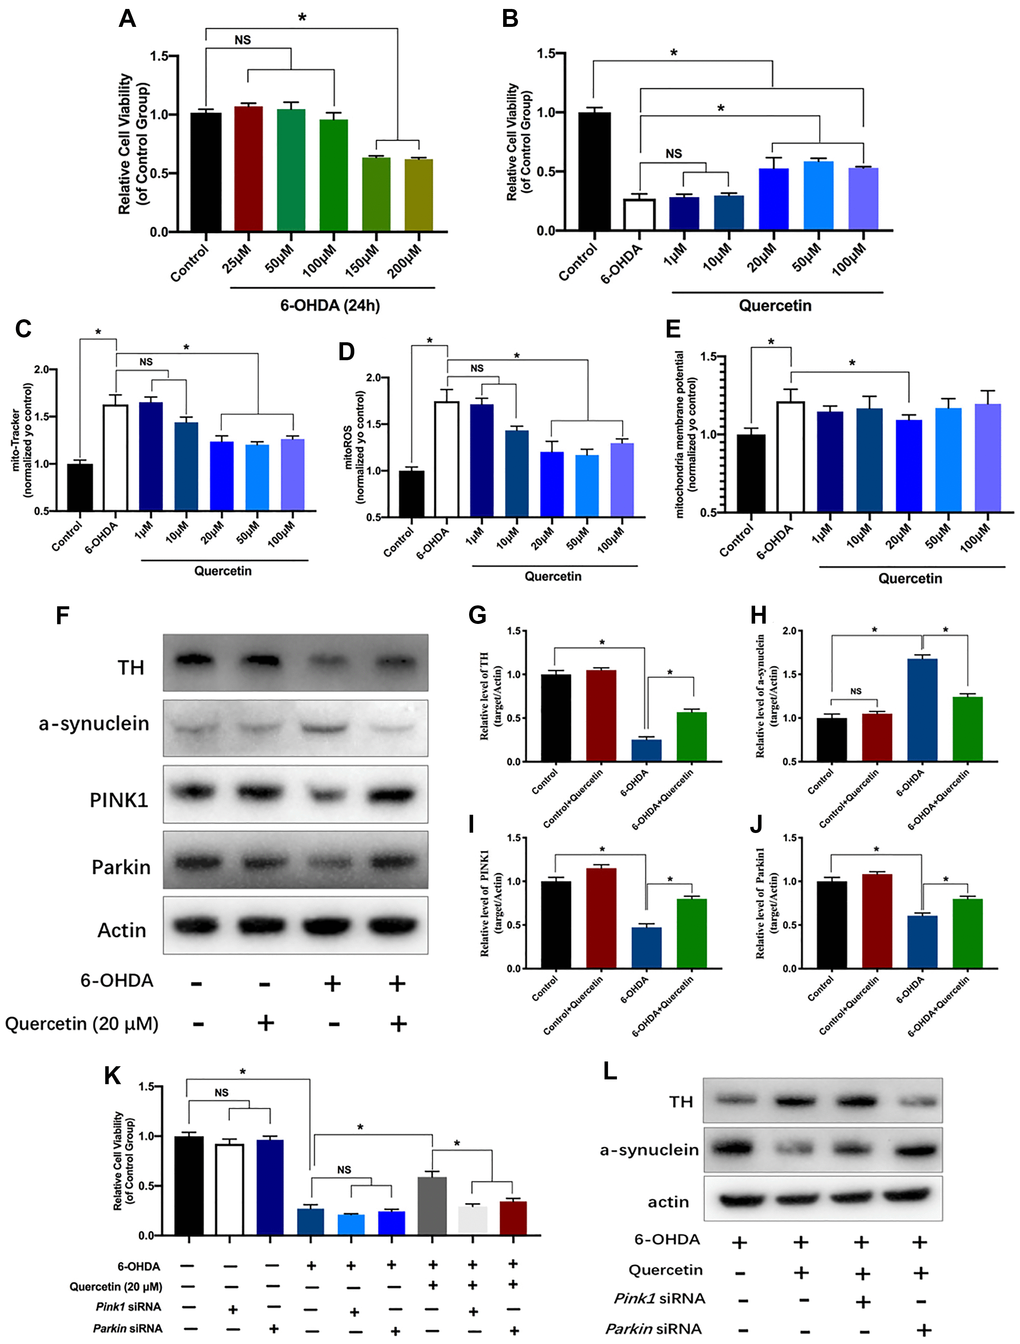 Neuroprotective effects of quercetin on neurotoxic-induced injury and mitochondria parameters in PC12 cells via PINK1 and Parkin mitophagy pathway. (A) Effects of different concentration of 6-OHDA on PC12 cells viability. (B) After pretreated with different concentration of quercetin (1, 10, 20, 50, 100 μM), the cells were incubated with 6-OHDA (150 μM) and different concentration of quercetin for 24 h. Cell viability assessed using the CCK8 assay. Data are expressed as mean ± SEM. n = 5–6 wells for each group. *P C), mitochondria ROS (D), and mitochondria membrane potential (E). (F) Changes of Tyrosine Hydroxylase (TH), a-synuclein and mitophagy proteins (PINK1 and Parkin) in HeLa cells with or without quercetin treatment. (G–J) Quantification of (F). (K) Cell viability assessed using the CCK8 assay with or without Pink1 and Parkin siRNA treatment. (L) The protein levels of TH and a-synuclein in different groups. Data are expressed as mean ± SEM. *P 